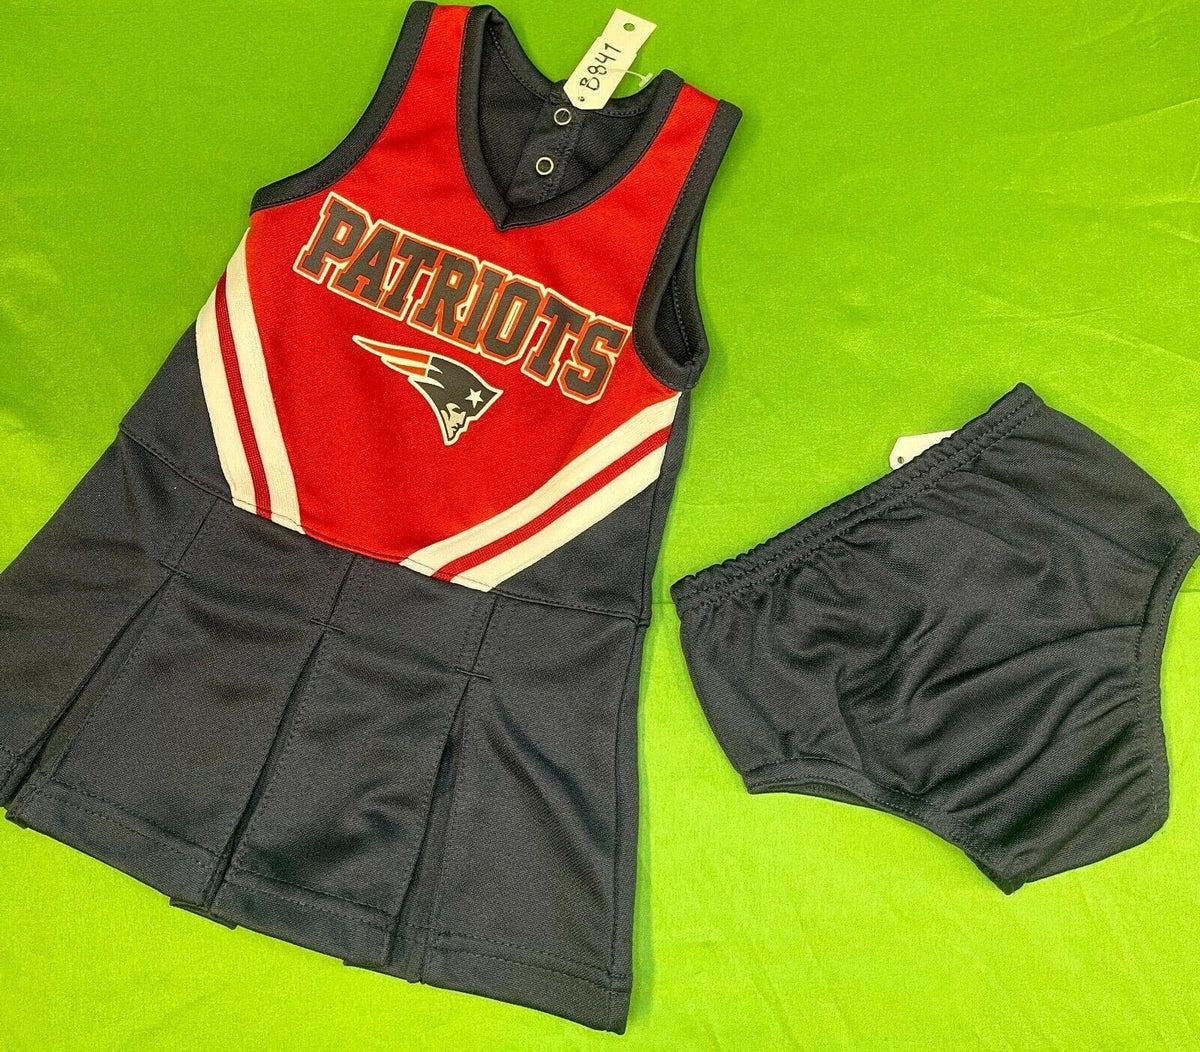 NFL New England Patriots Cheerleader-Style Dress and Nappy Cover 12 months